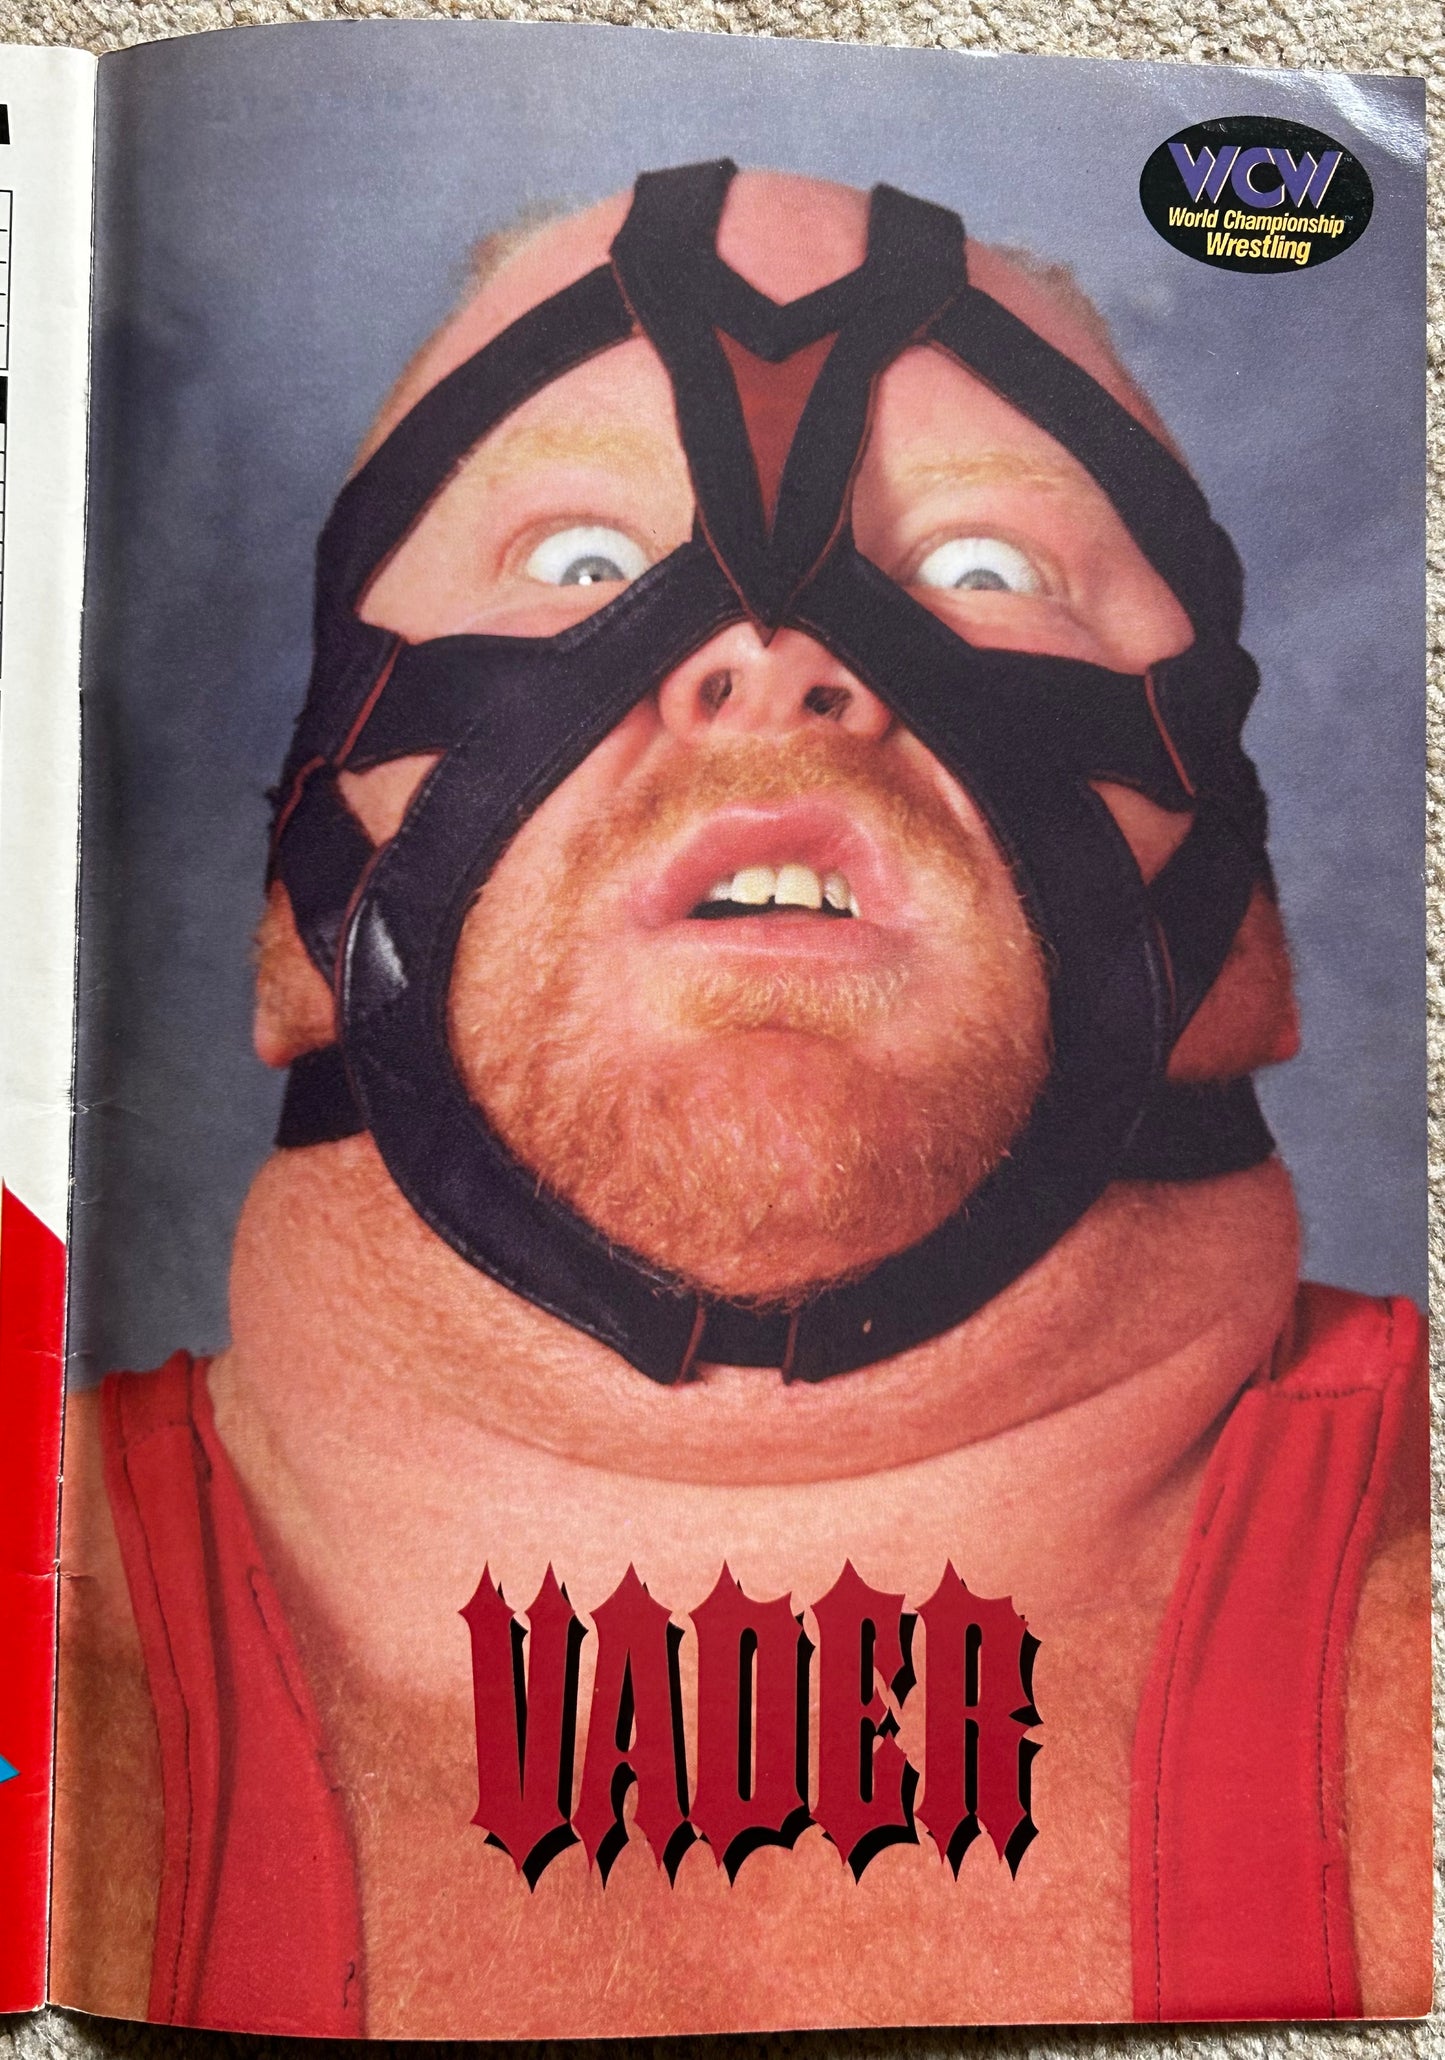 WCW Magazine March 1995 Issue 1